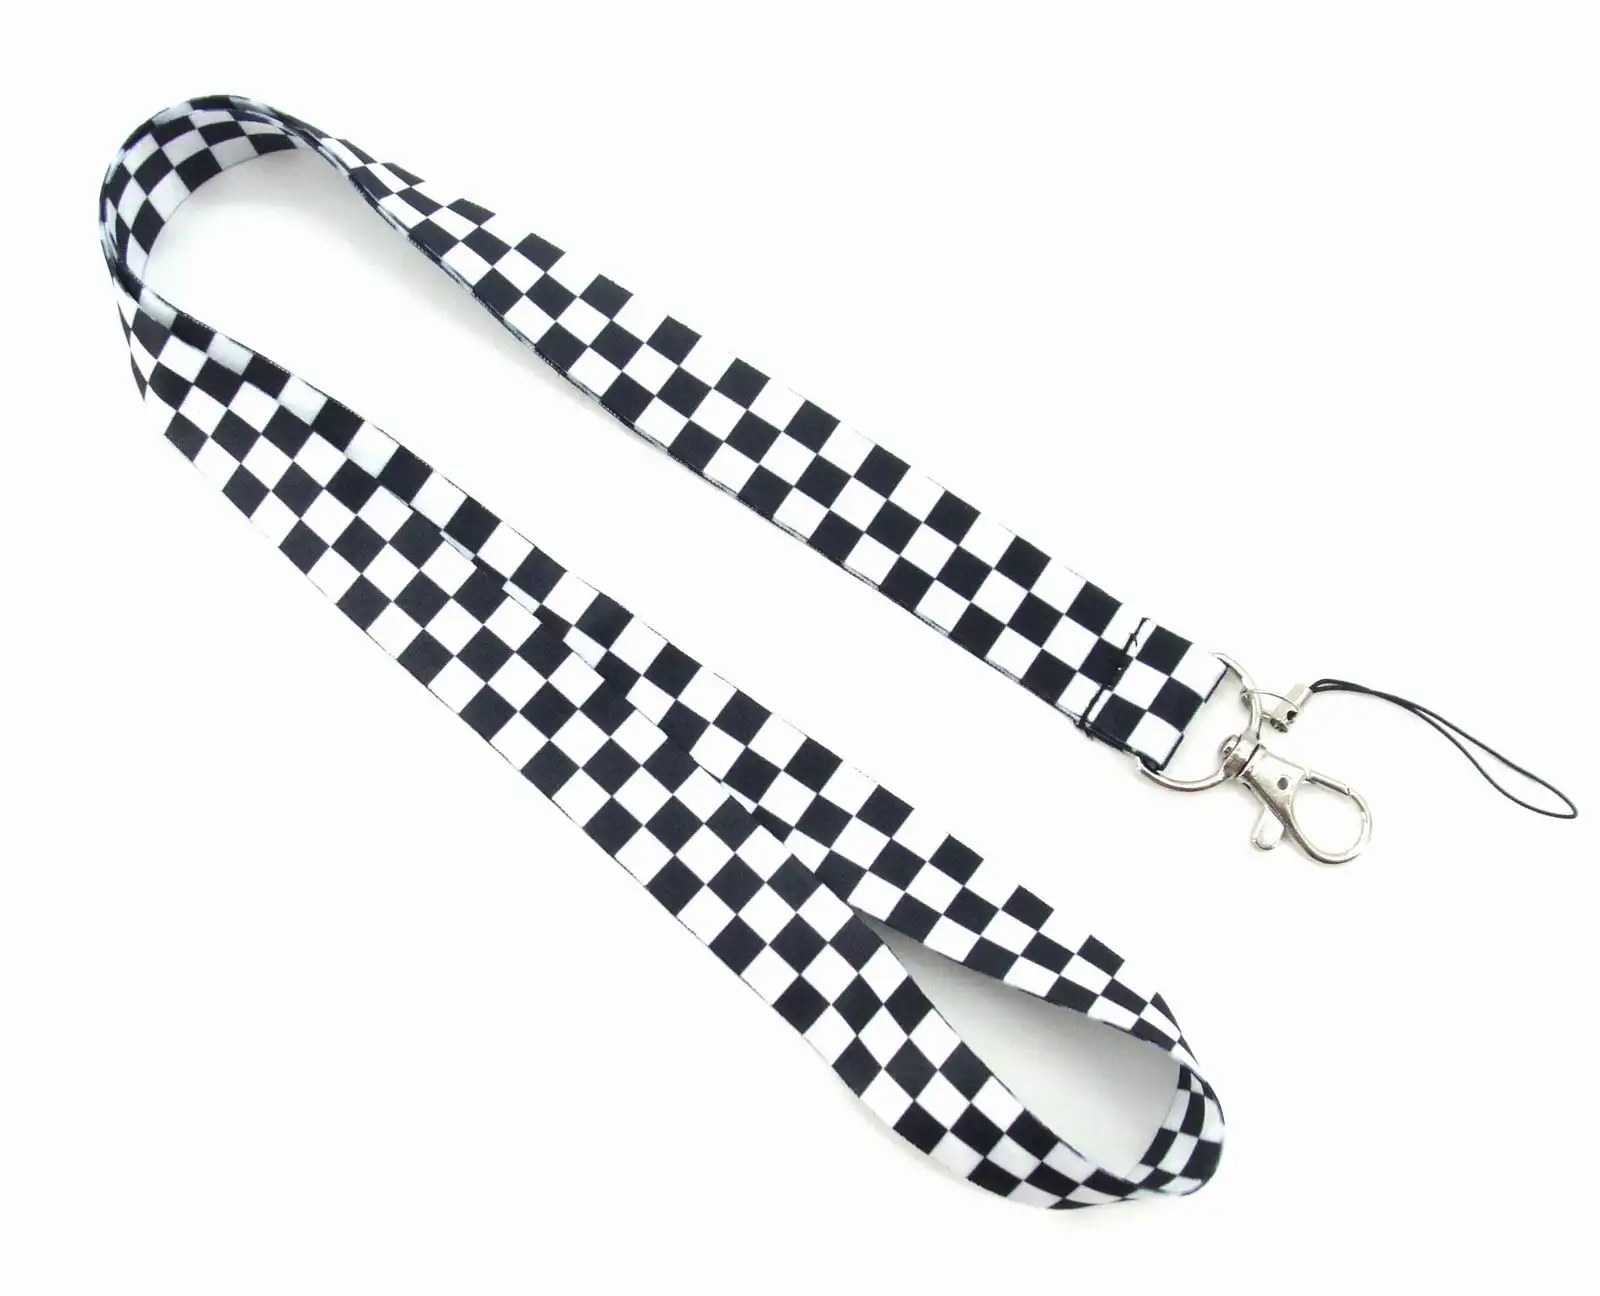 Multi Color Retractable Tool Lanyard Safety Environment Friendly Dye Sublimation Polyester Neck Strap Lanyard For Key Chains